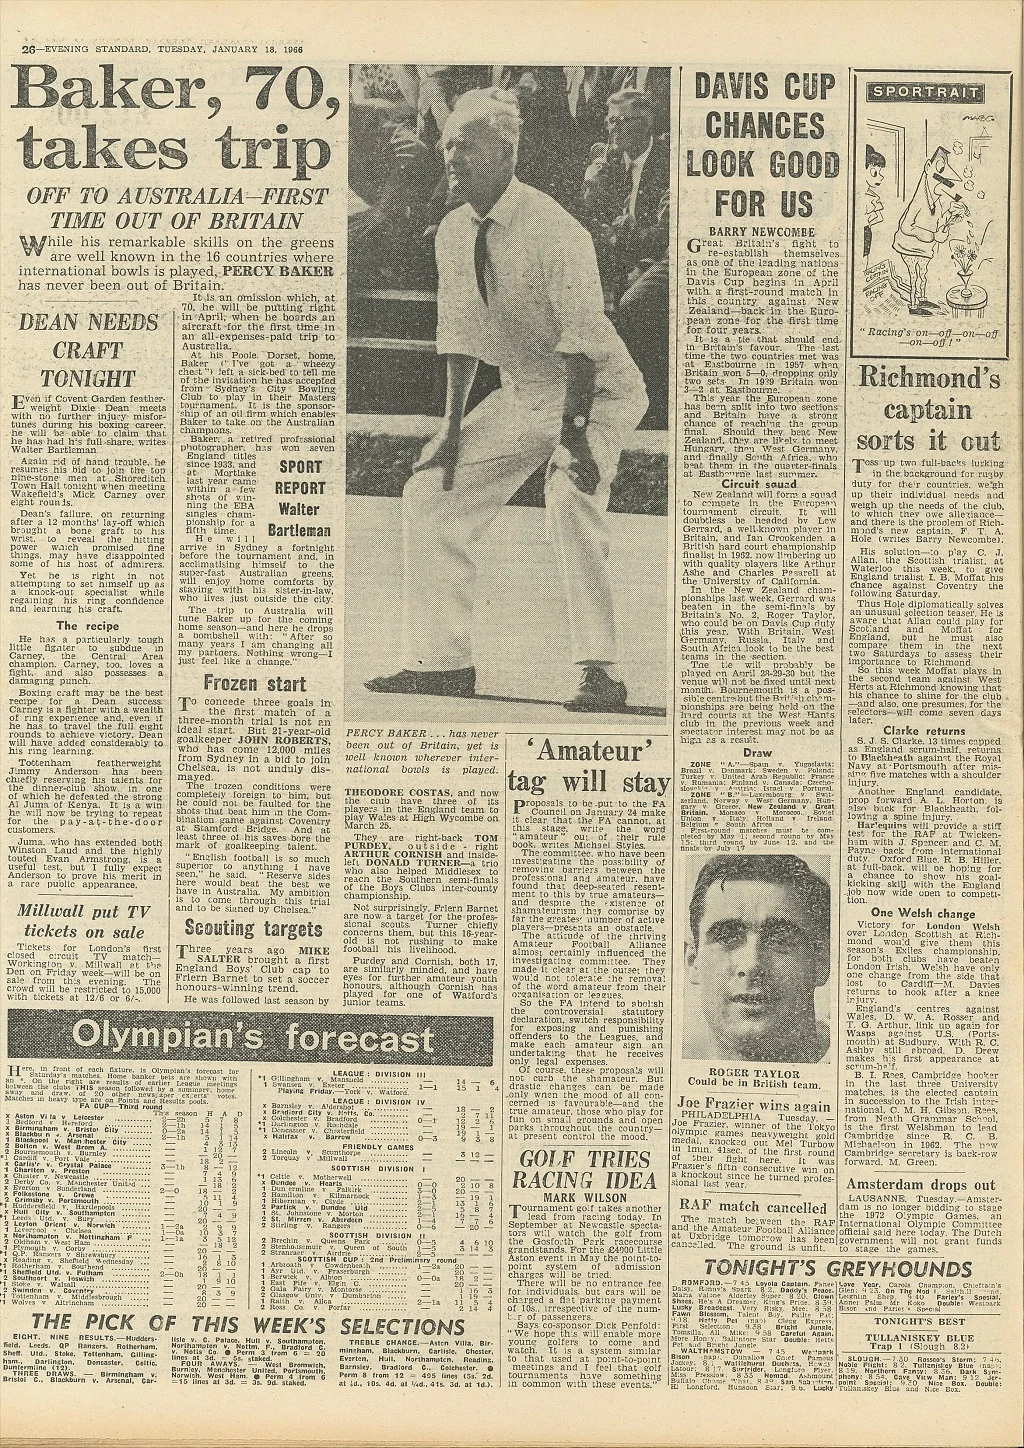 Newspaper article from Evening Standard dated January 18, 1966, covering 70-year-old Percy Baker's Australian tour.